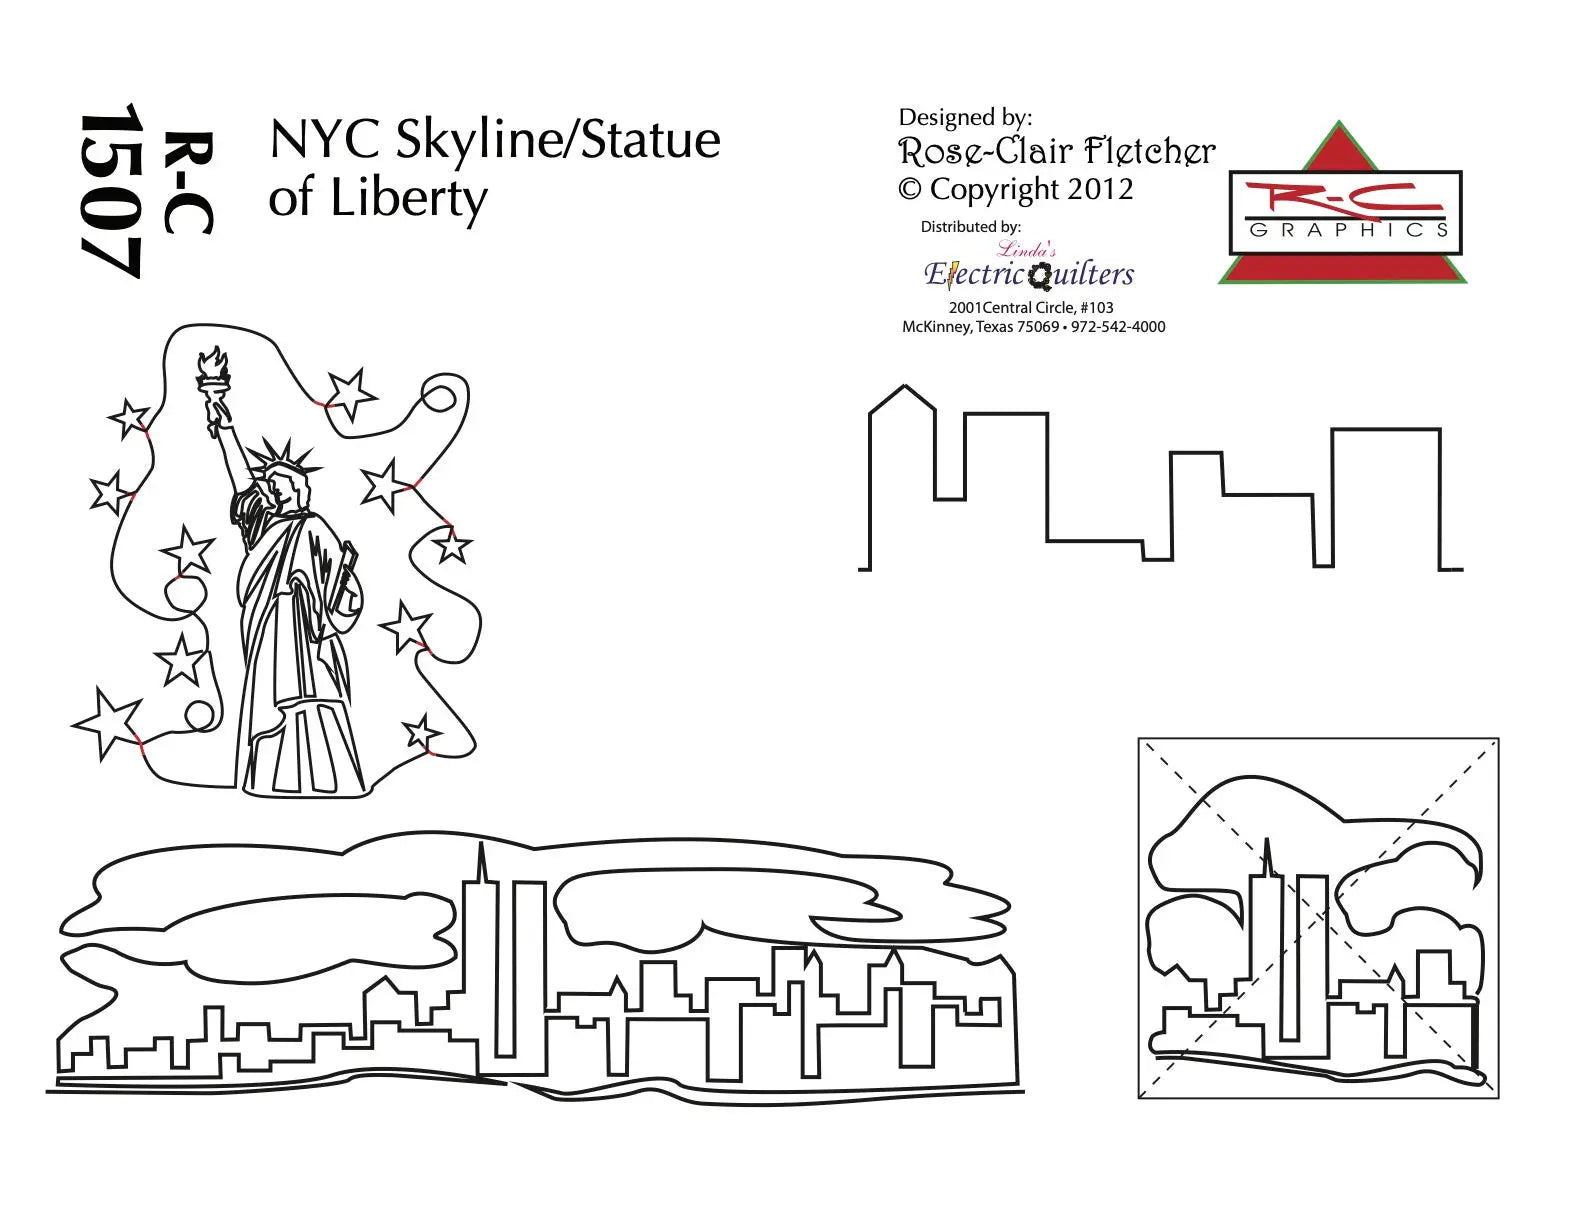 1507 Nyc Skyline And The Statue Of Liberty Pantograph Rose-Clair Fletcher - Linda's Electric Quilters